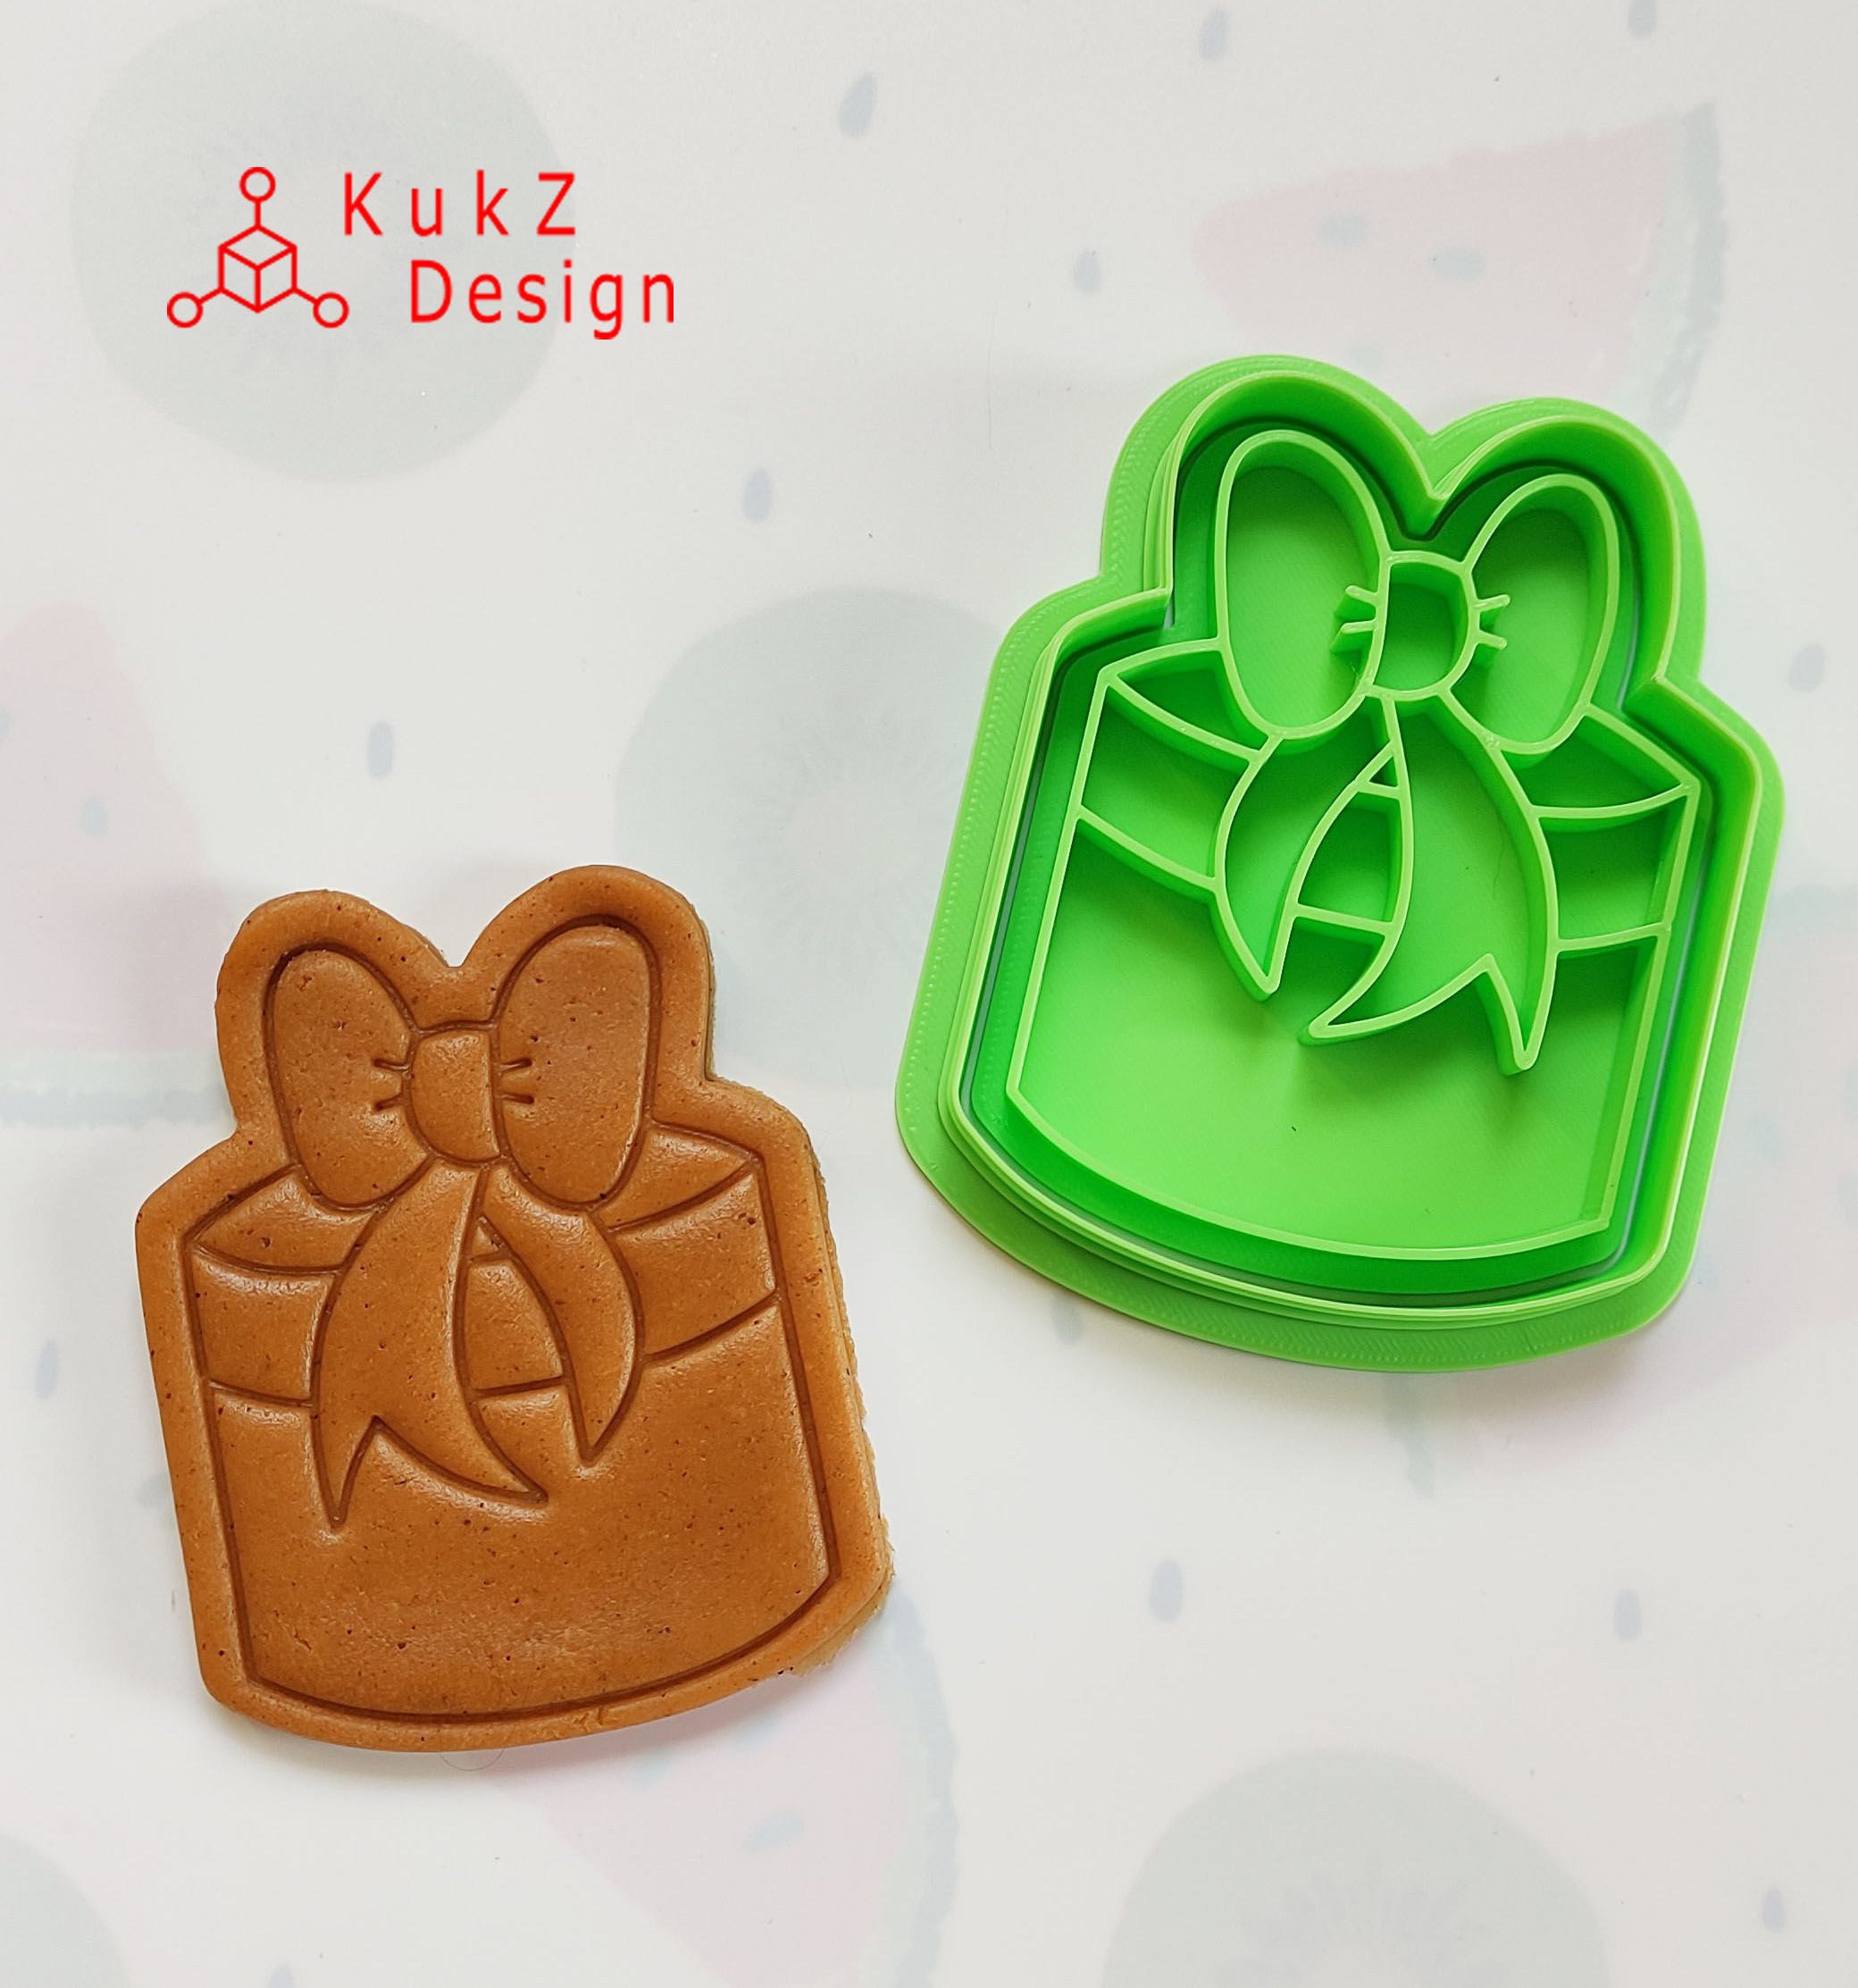 Birthday gift Cookie tool |Cookie Stamp |Fondant Embosser |biscuit cutter Gift 7cm Square cutter